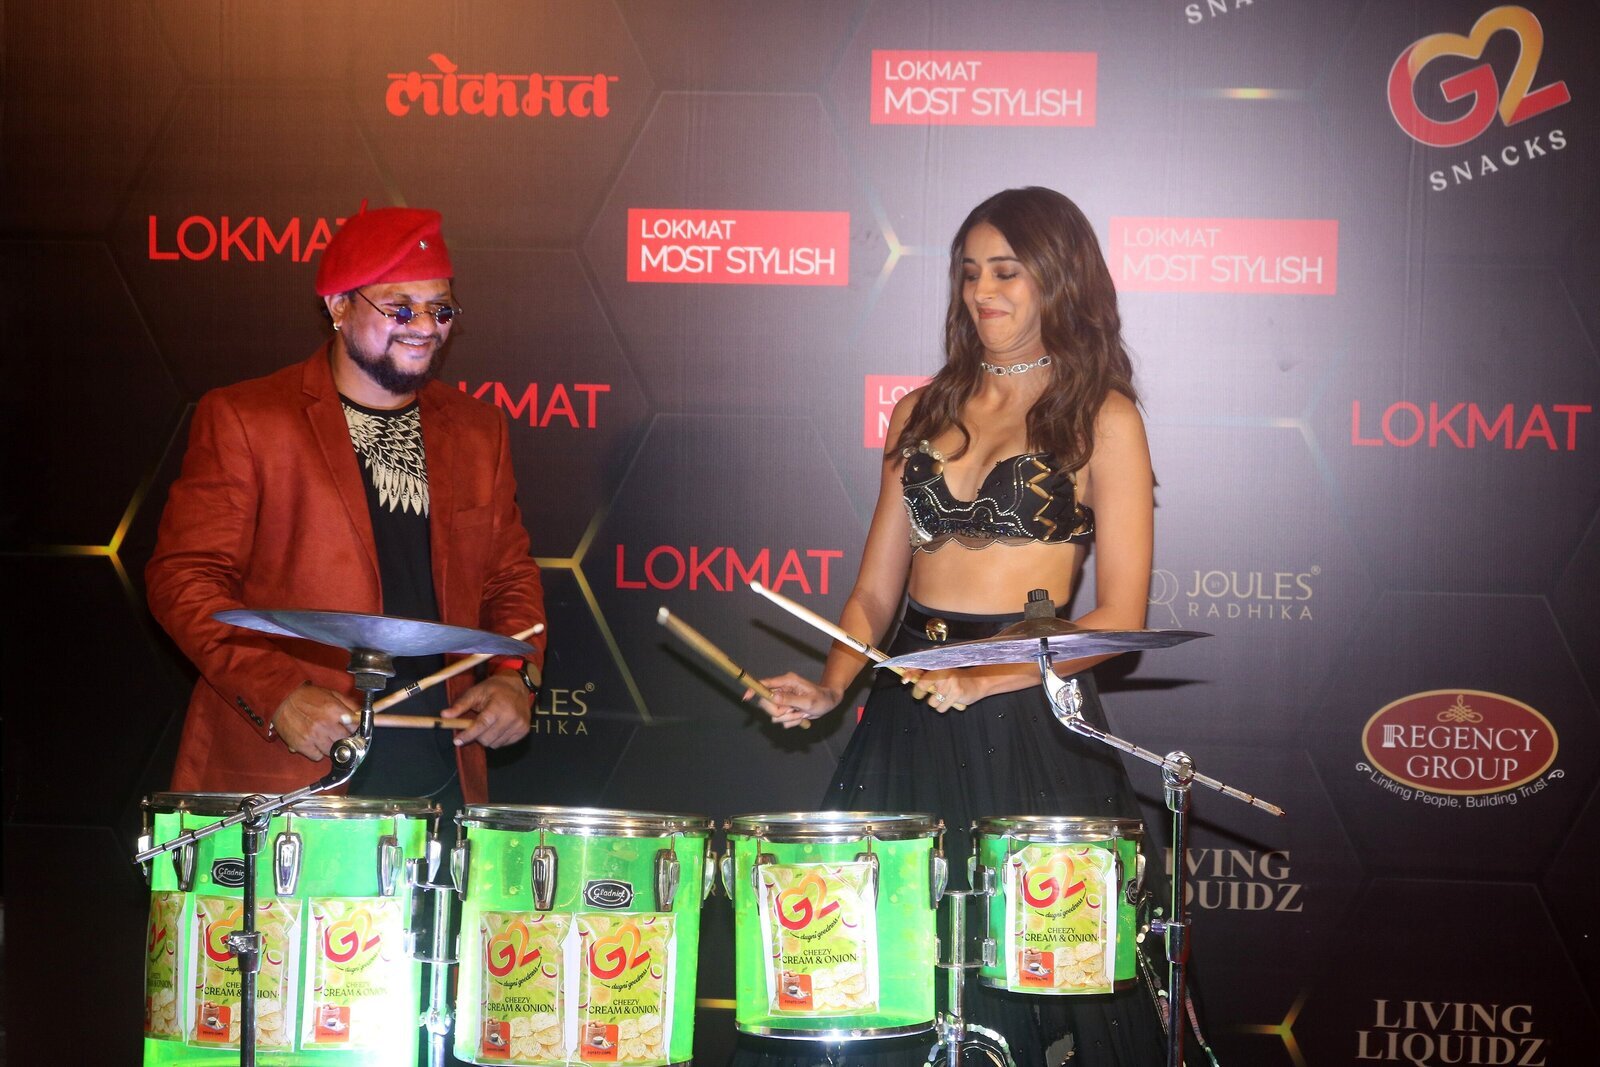 Ananya Panday - Photos: Celebs At The Lokmat Most Stylish Awards 2021 | Picture 1845743